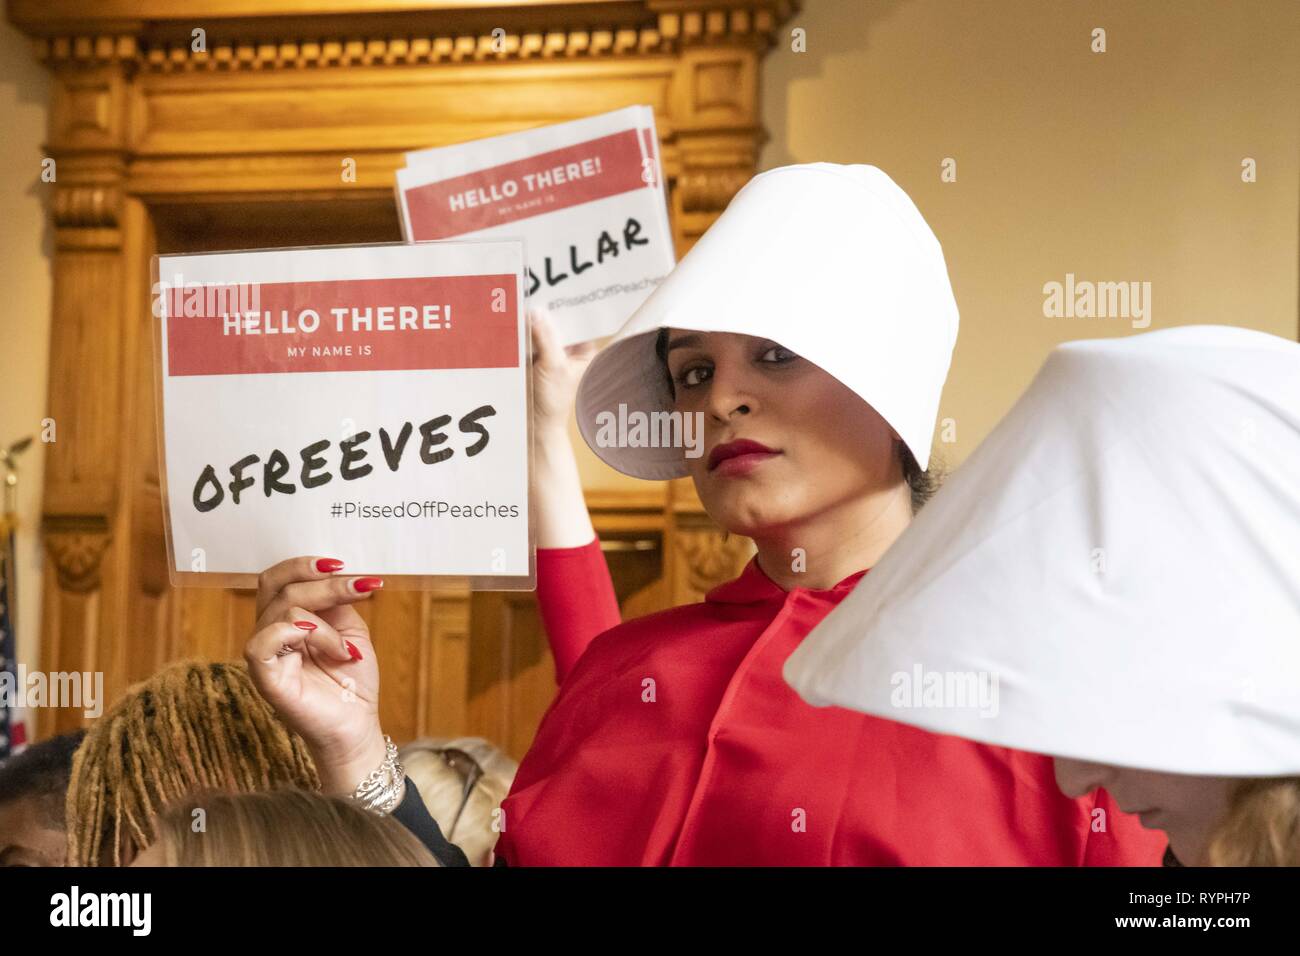 Atlanta, Georgia, USA. 14th Mar, 2019. Dozens of pro-choice protesters demonstrated against the ''heartbeat bill'' legislation at the Georgia State Capitol building. The legislation would ban most abortions after six weeks. The protest was organized by several groups including Handmaids Unite - Georgia. Several protesters dressed as characters from the book The Handmaid's Tale. Credit: Steve Eberhardt/ZUMA Wire/Alamy Live News Stock Photo